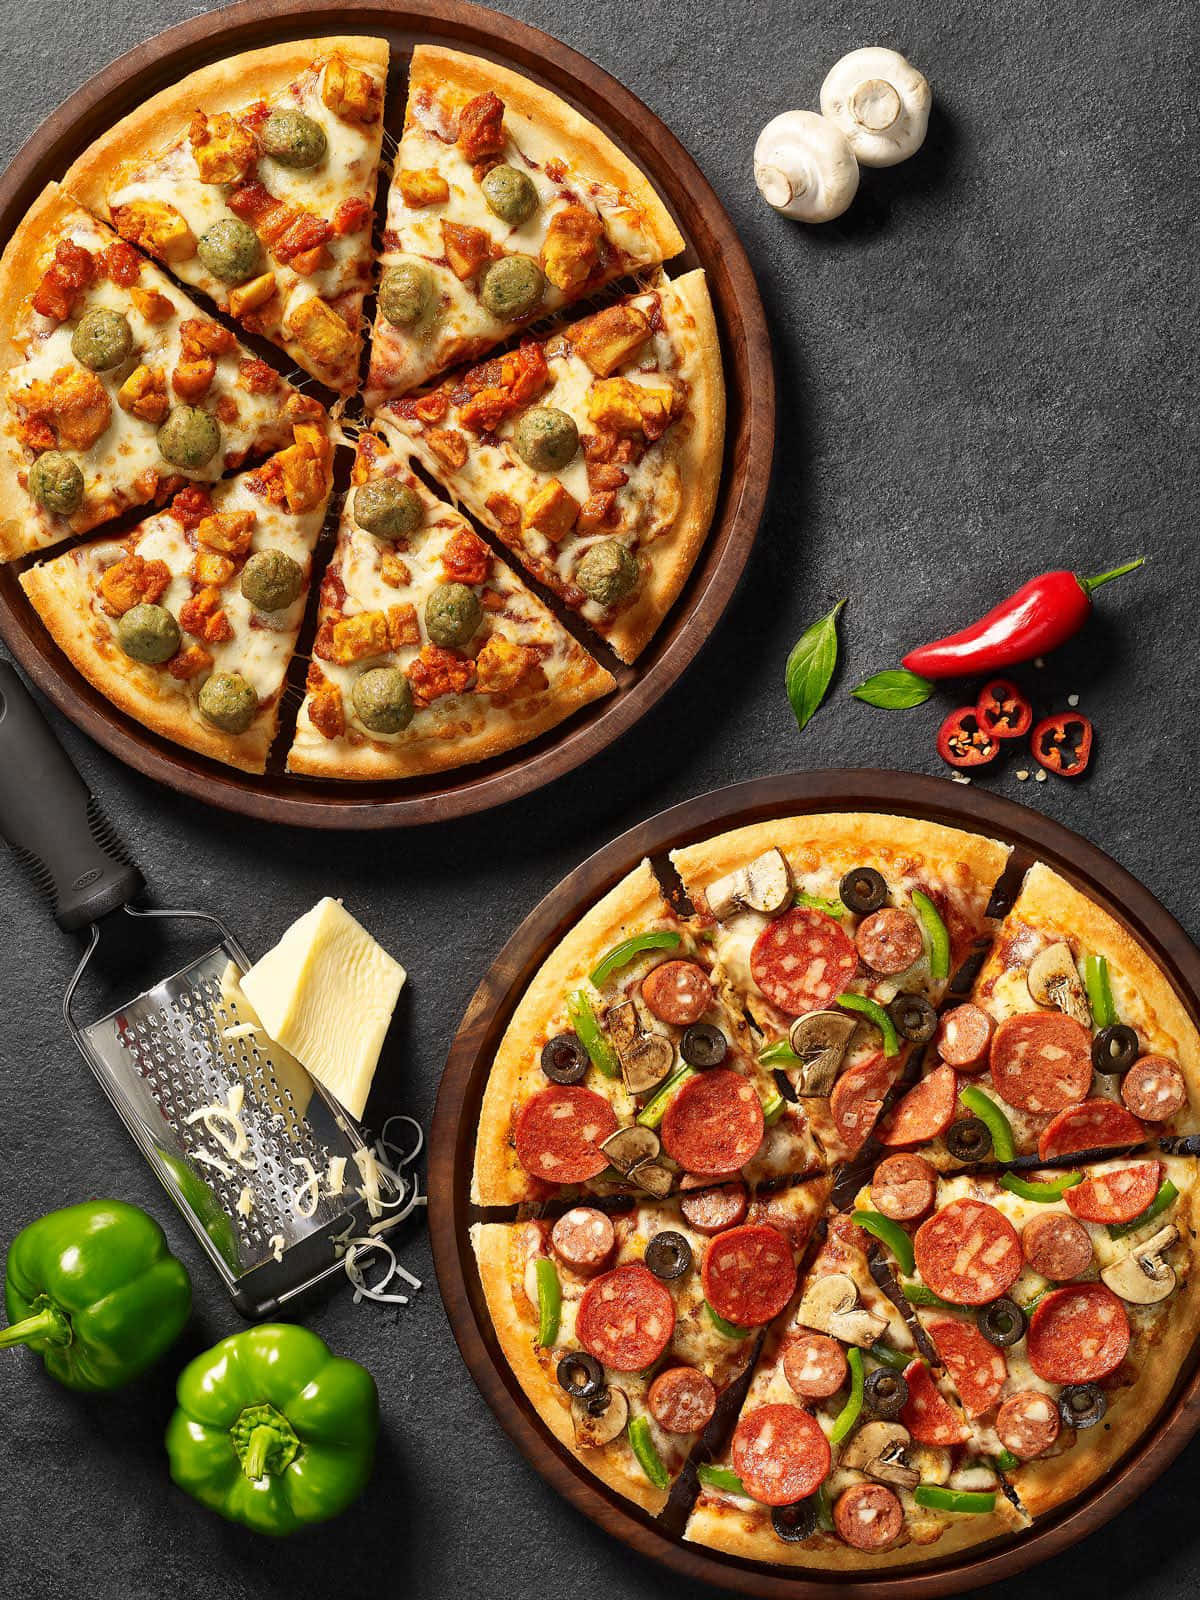 Try our delicious selection of hand-crafted pizzas!